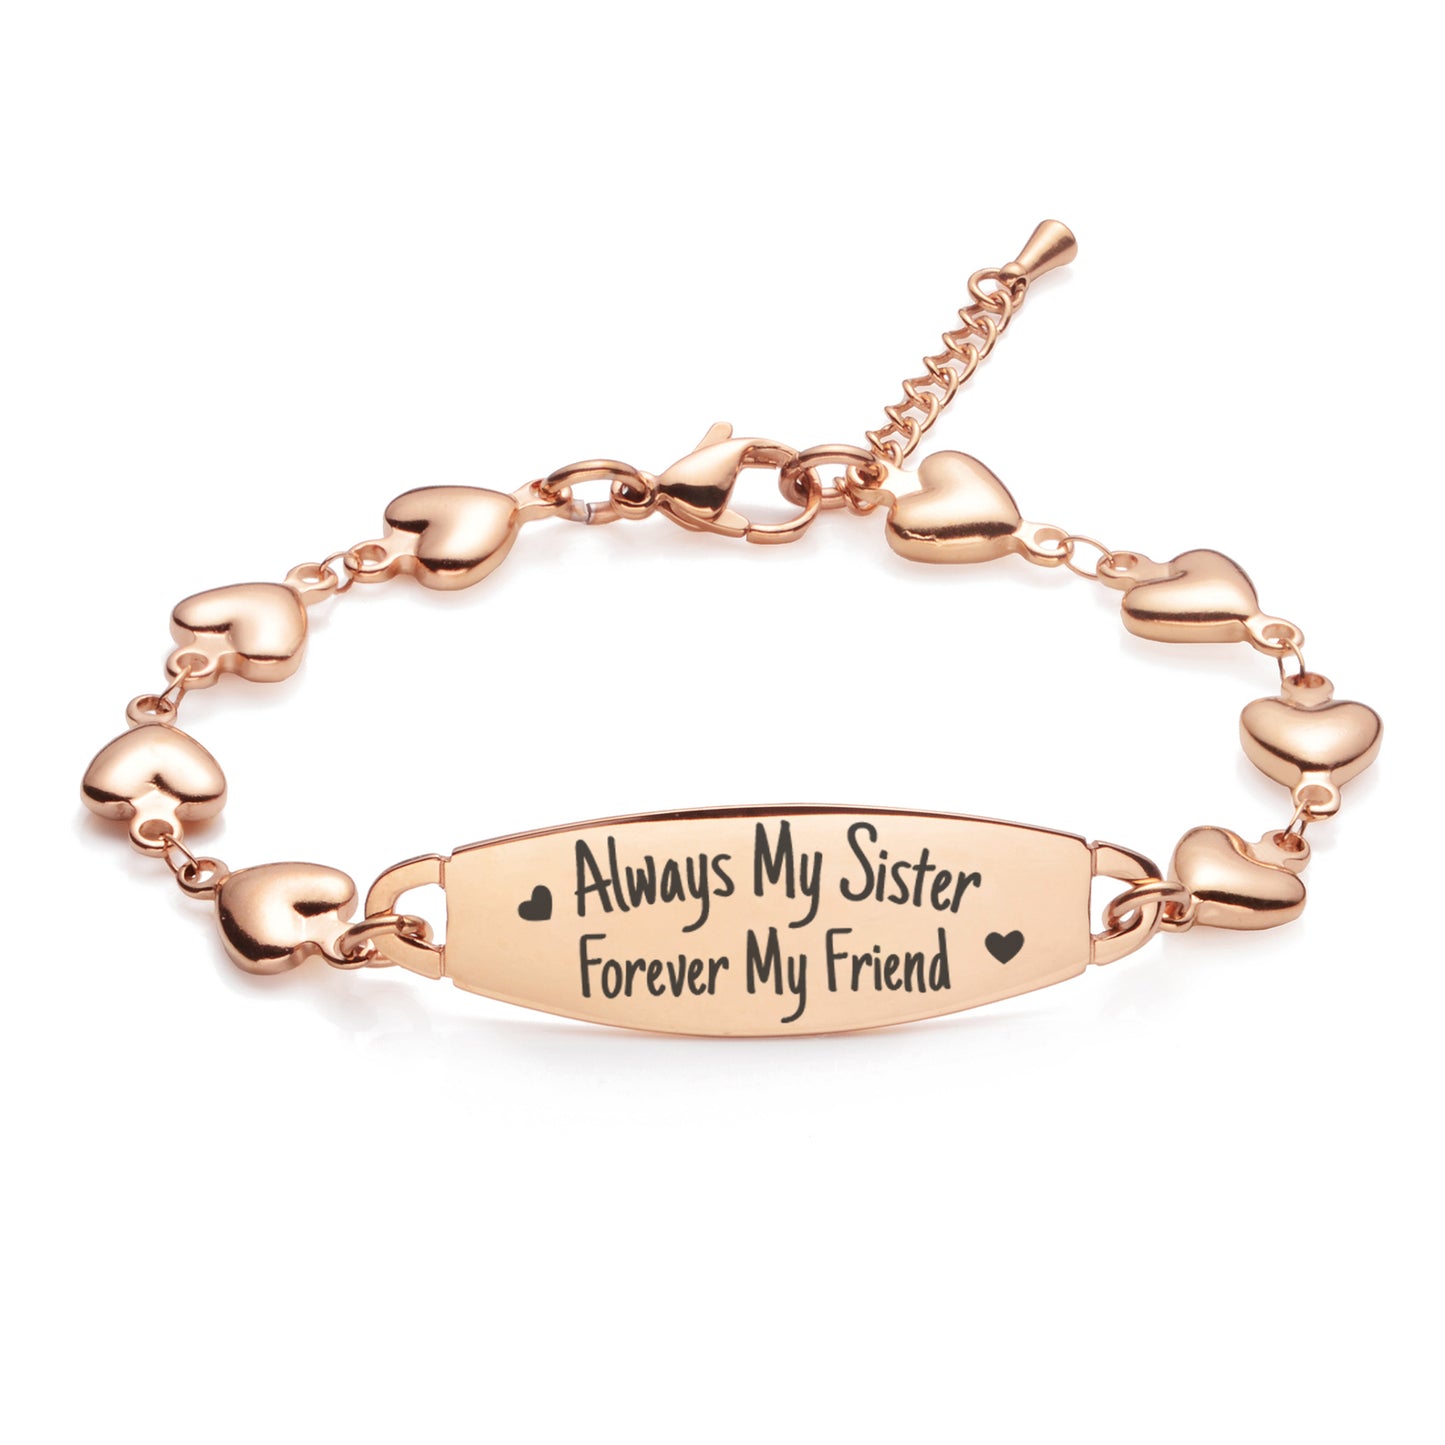 Friendship sister bracelets talk about sisters cute matching for best friends-Always My Sister Forever My Friend Fashion Heart